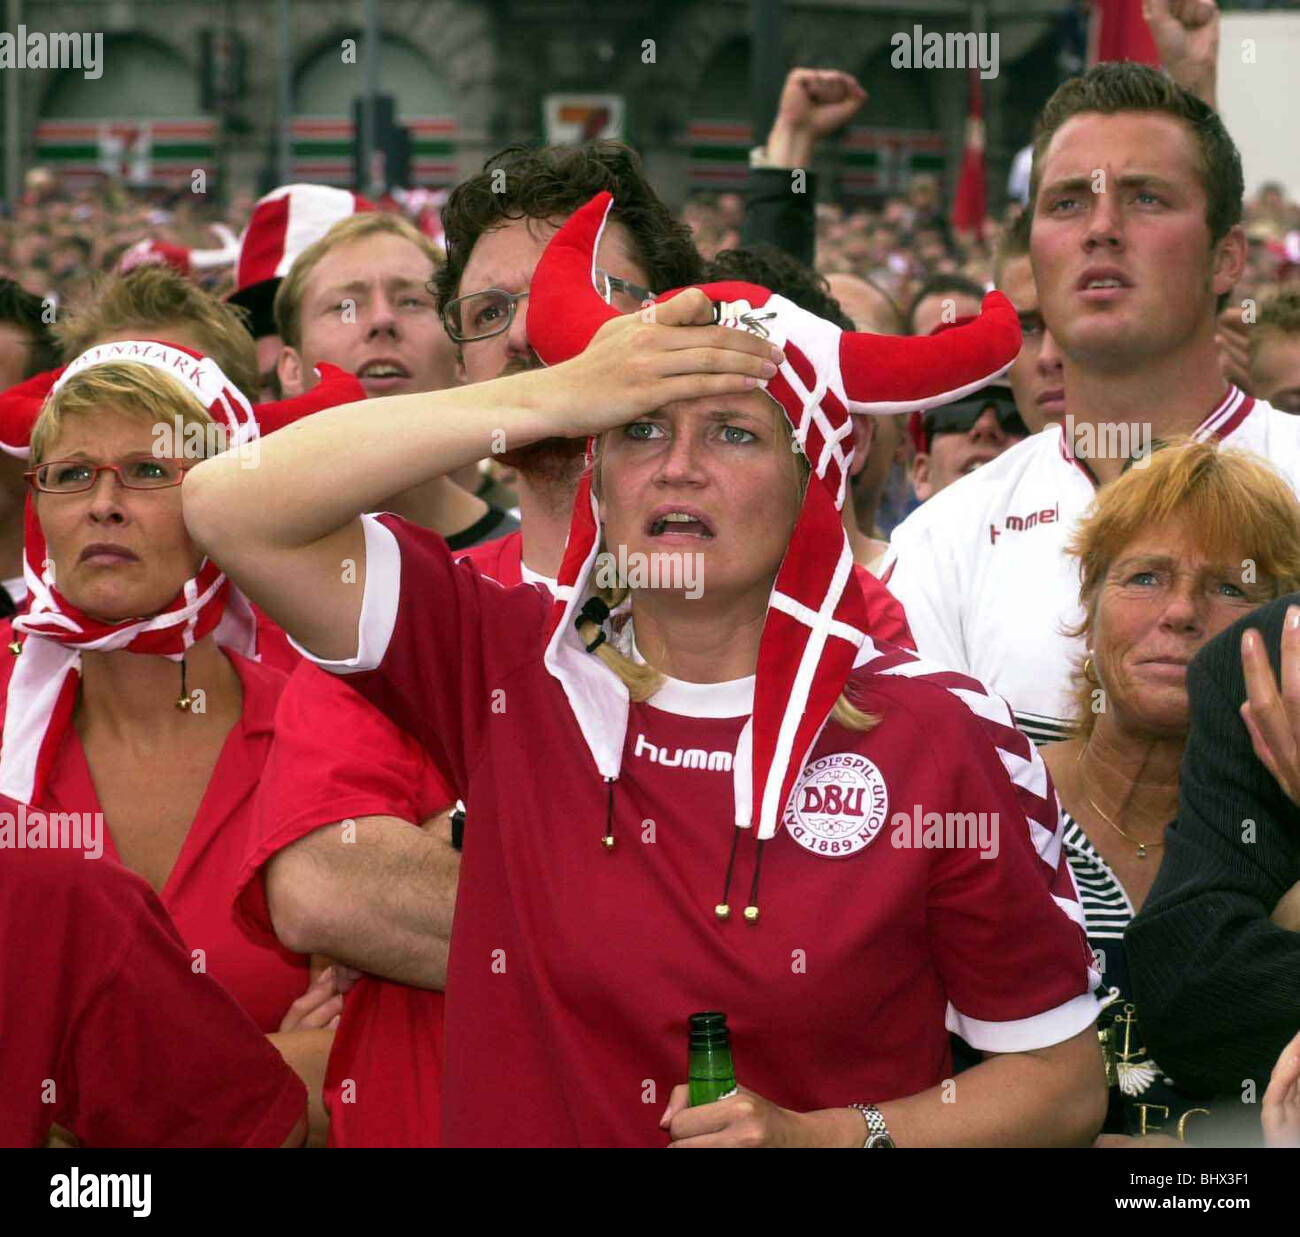 Football Fans Supporters June 2002 Pictured ahead of England v Denmark 2nd Round Match Danish fans watch their team's 3-0 defeat on a giant TV screen in Copenhagen Stock Photo